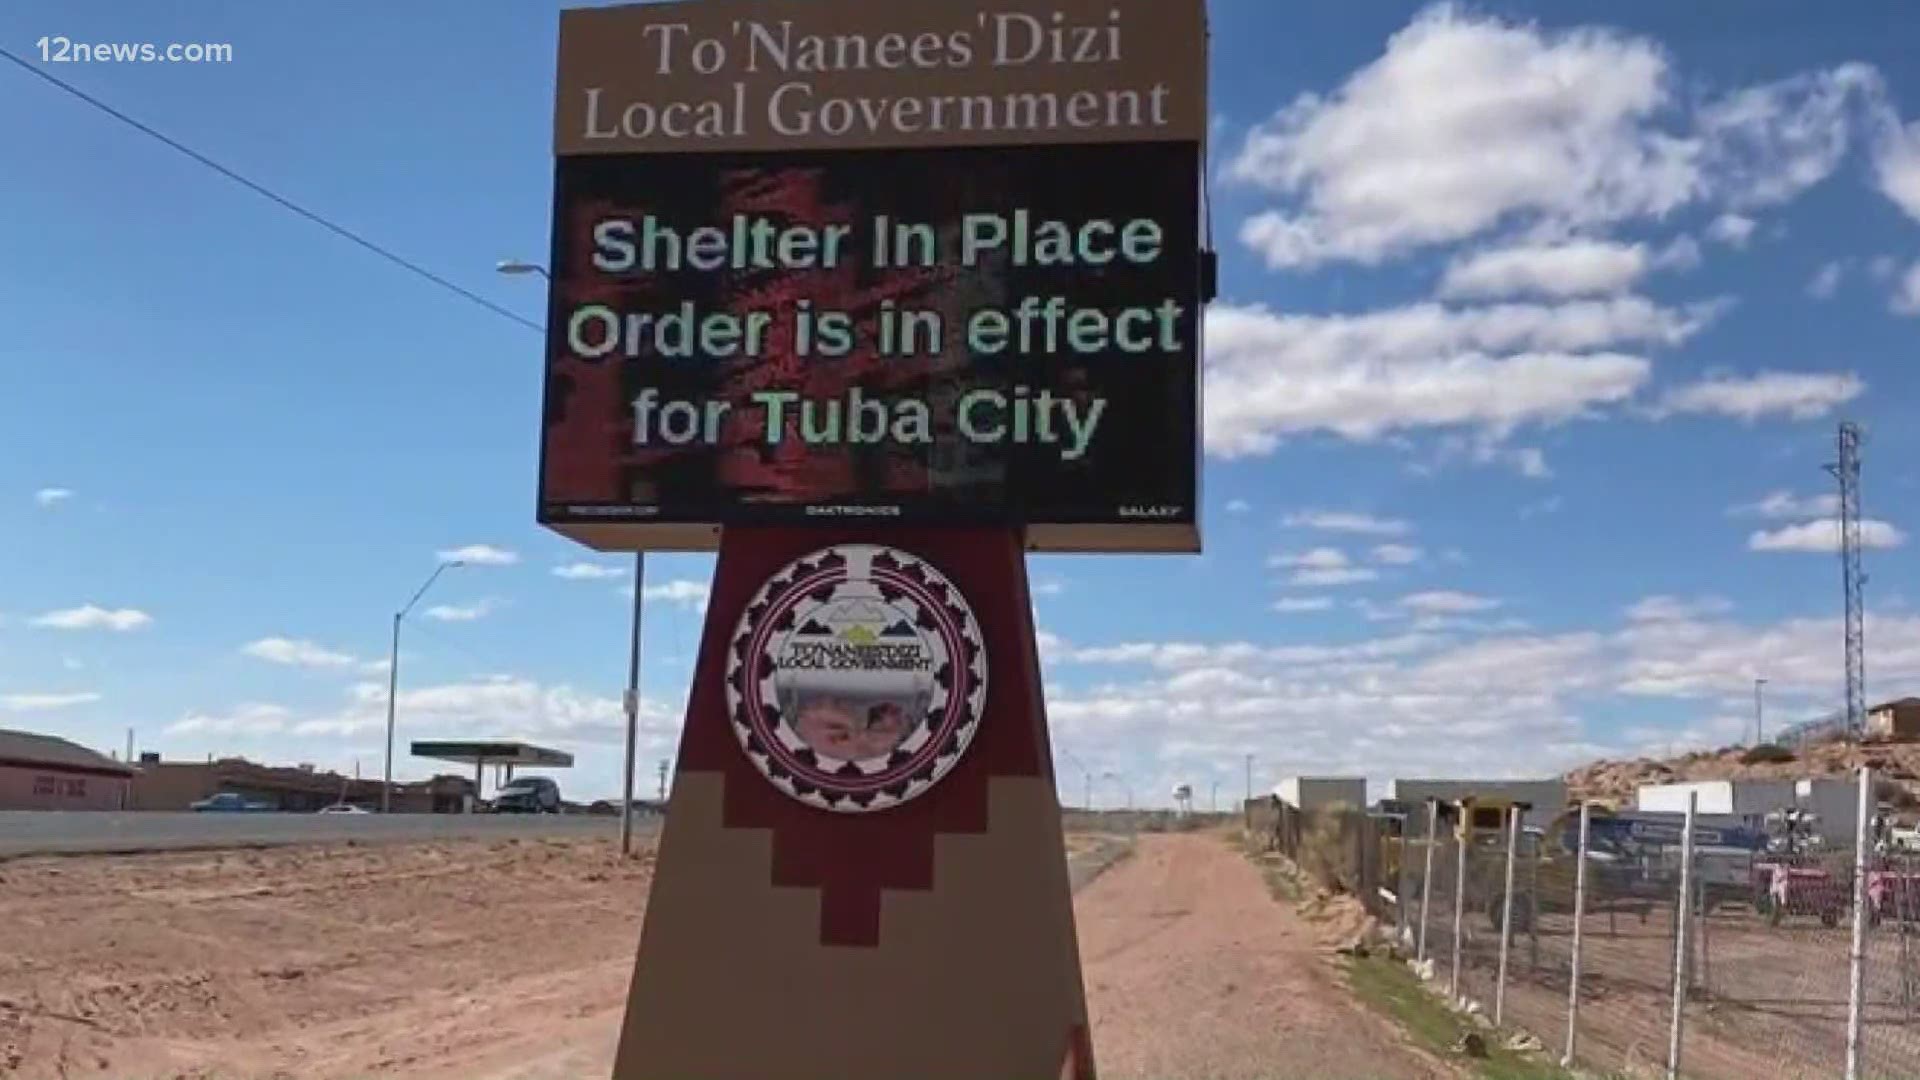 Coronavirus has hit the Navajo Nation hard, and Trump has promised millions of dollars in relief. The Navajo vice president says they've heard empty promises before.